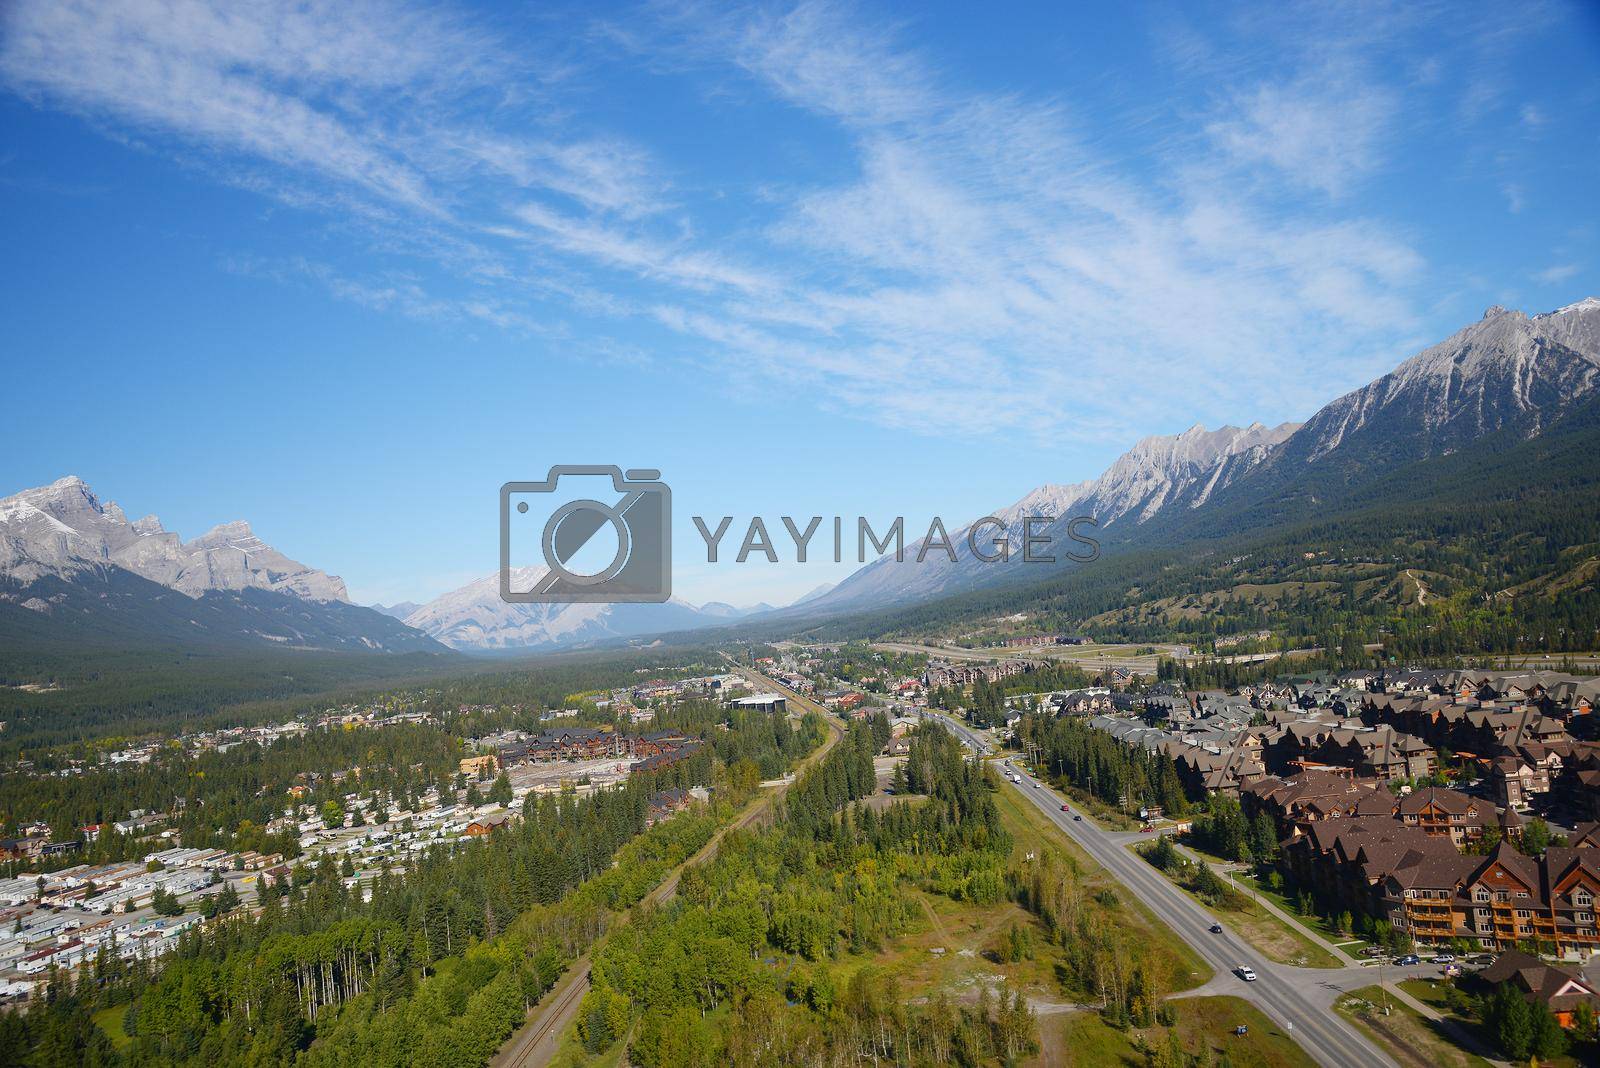 Royalty free image of canadian rockies by porbital